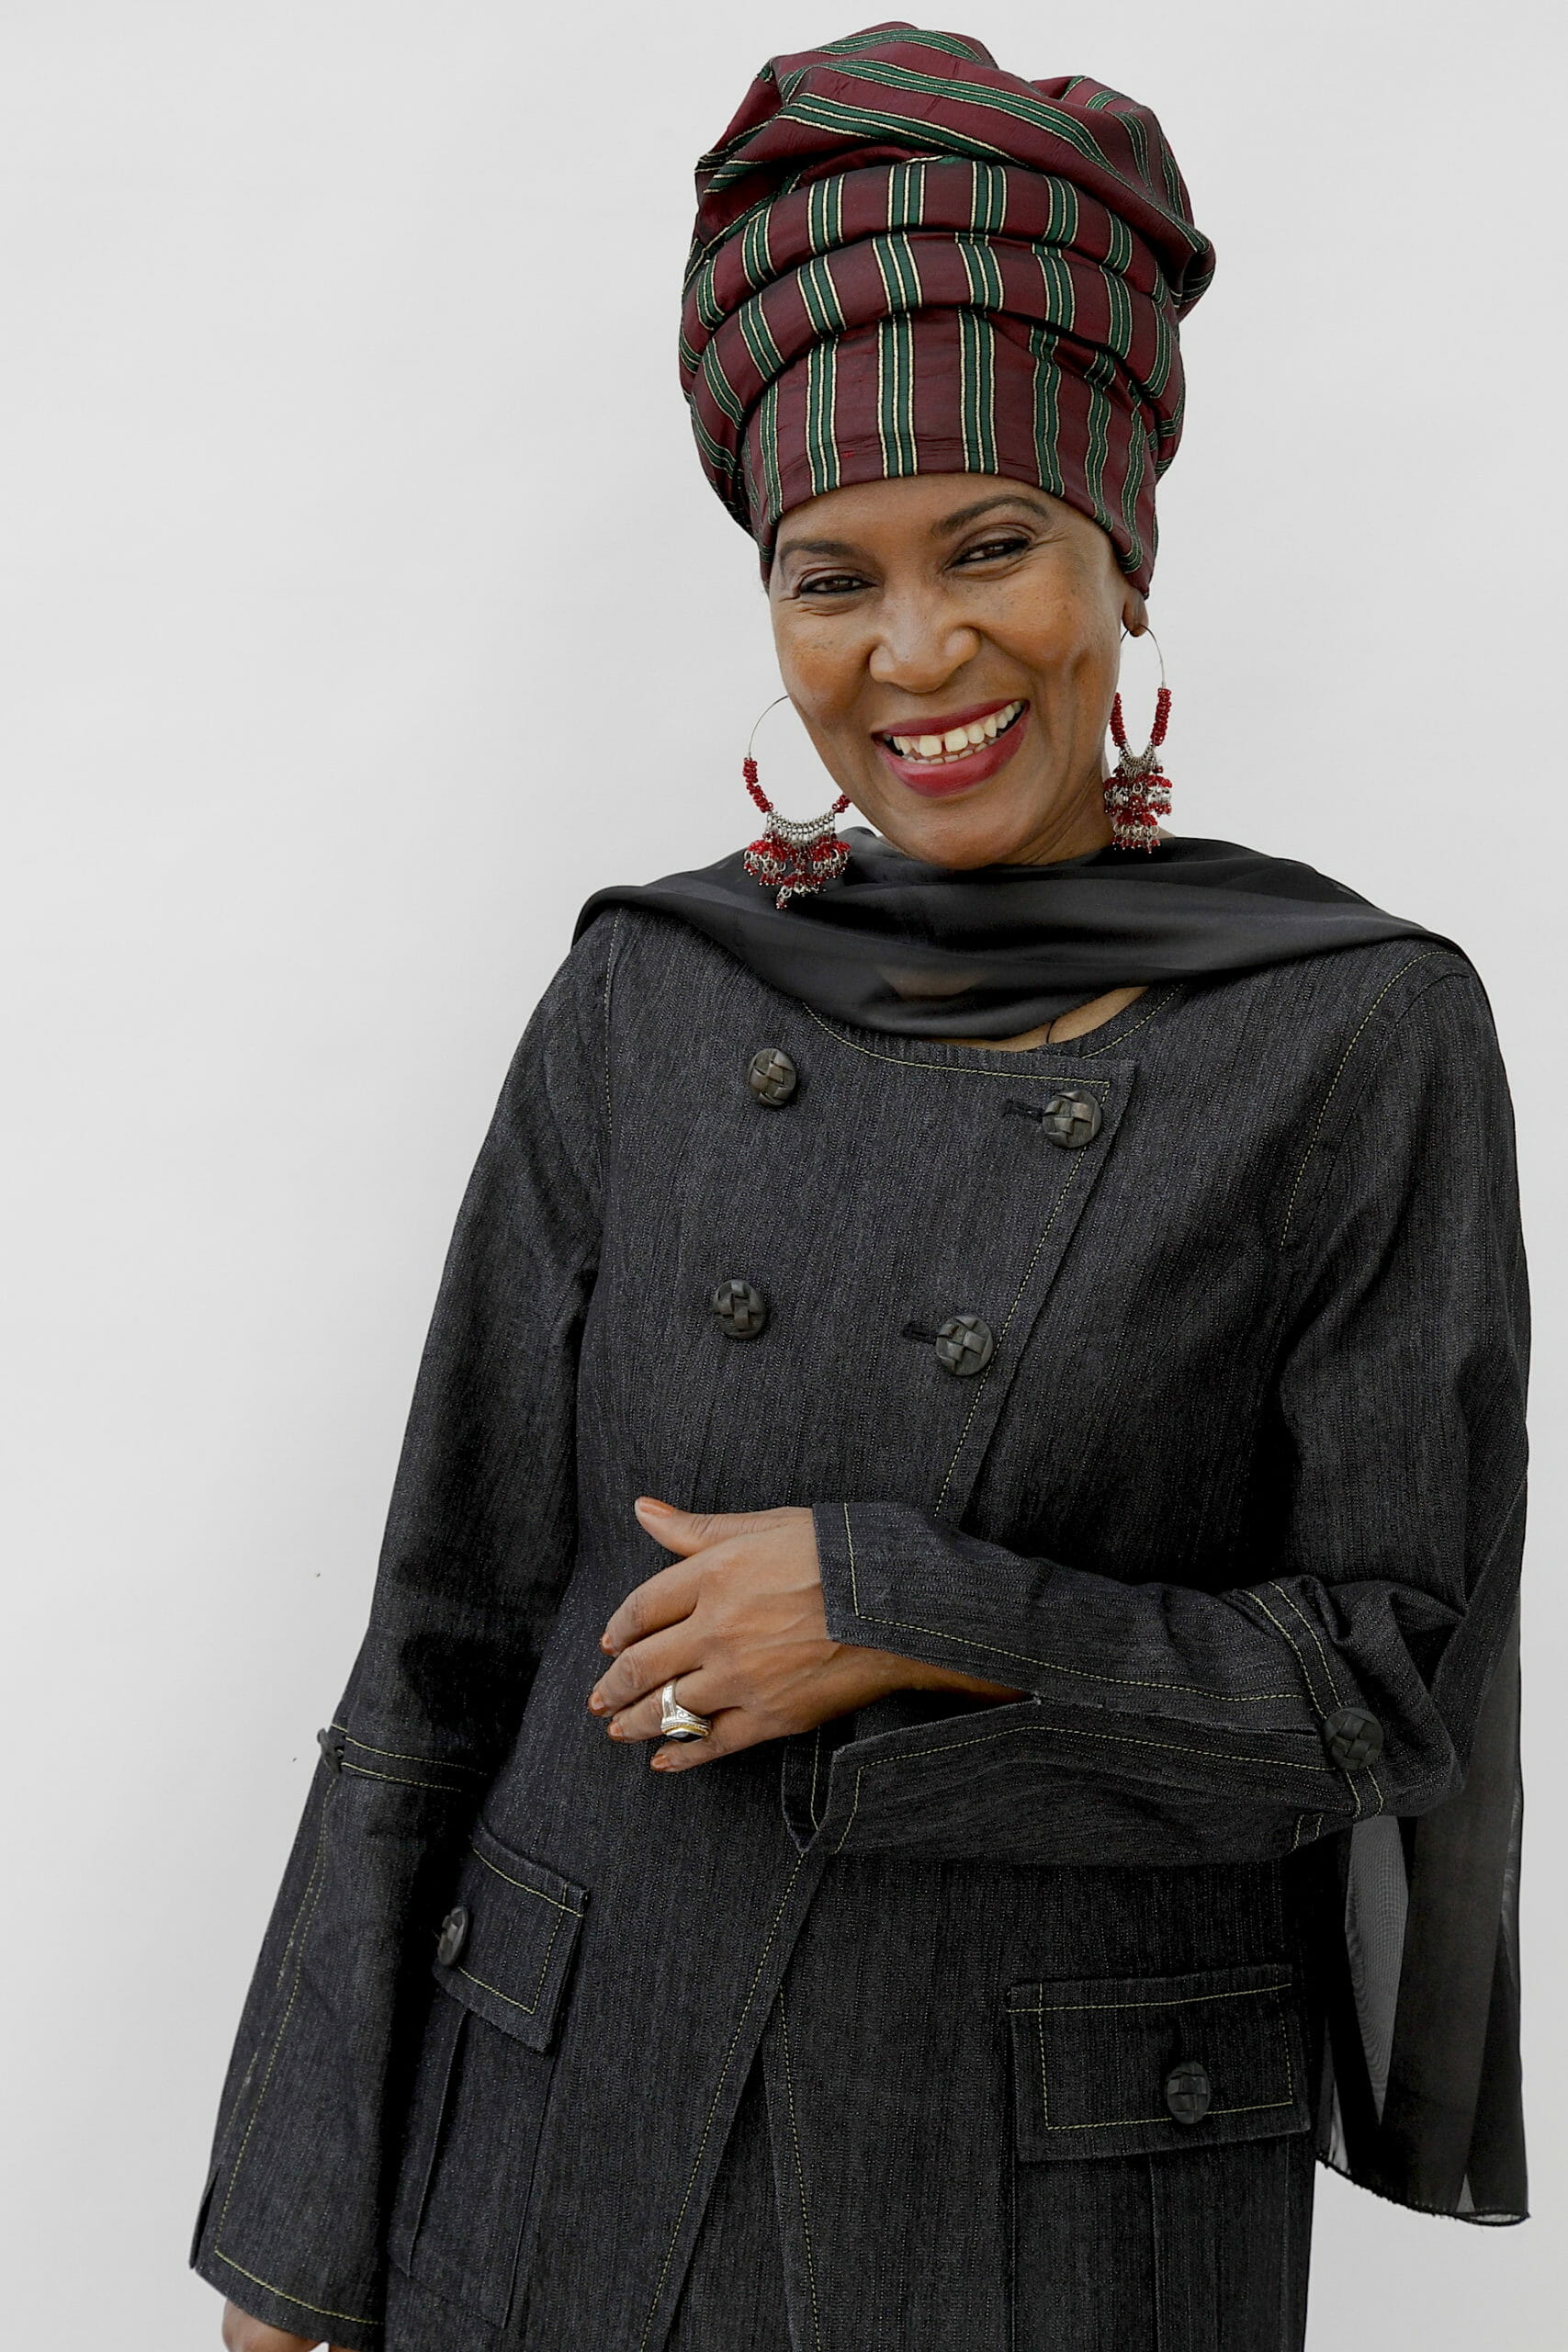 Ashro Woman of the Week, Wajeedah, a smiling black woman in a gray print headwrap and gray buttoned coat.